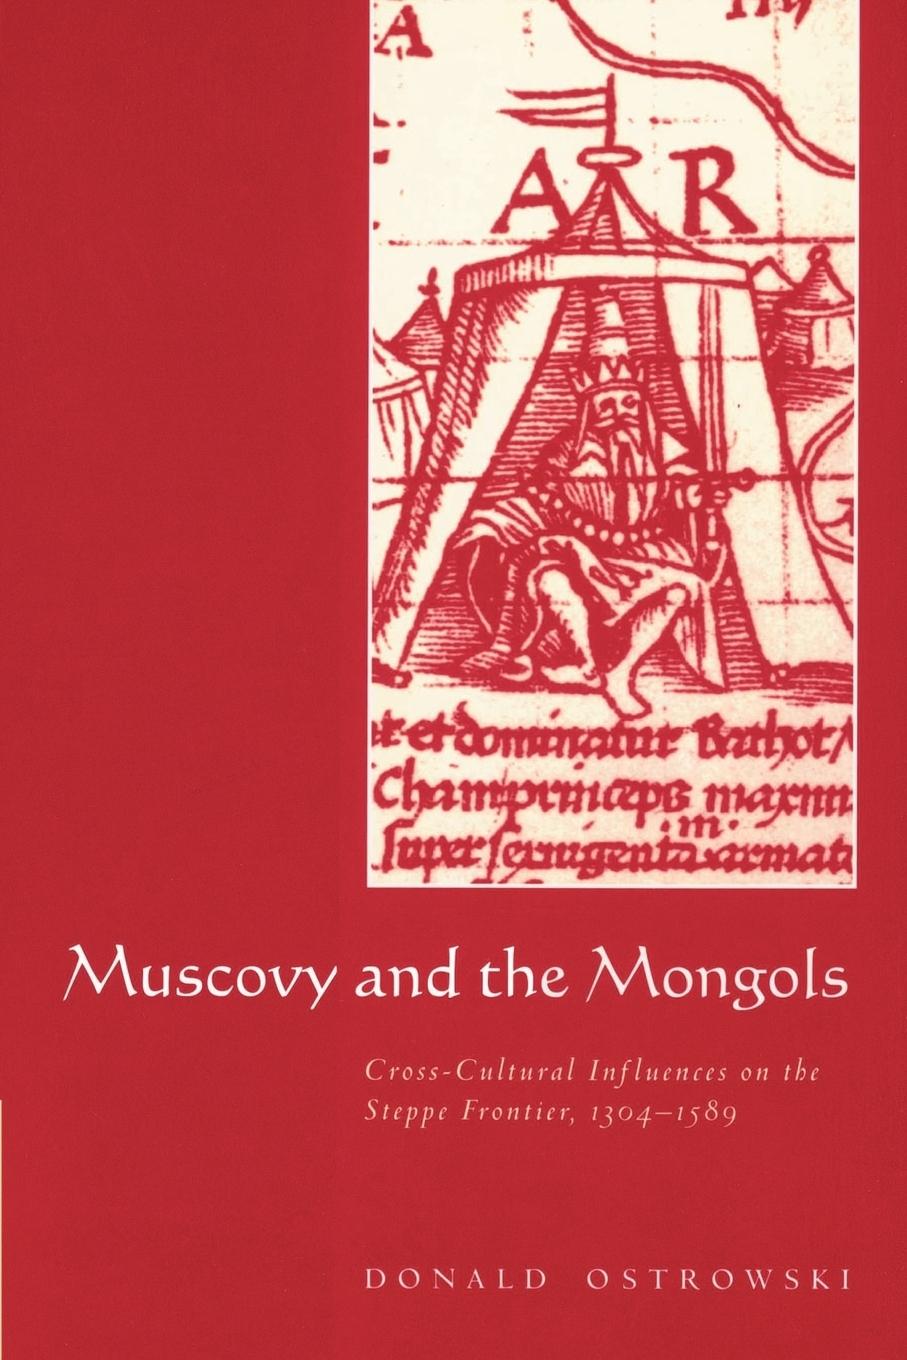 Muscovy and the Mongols - Ostrowski, Donald Donald, Ostrowski